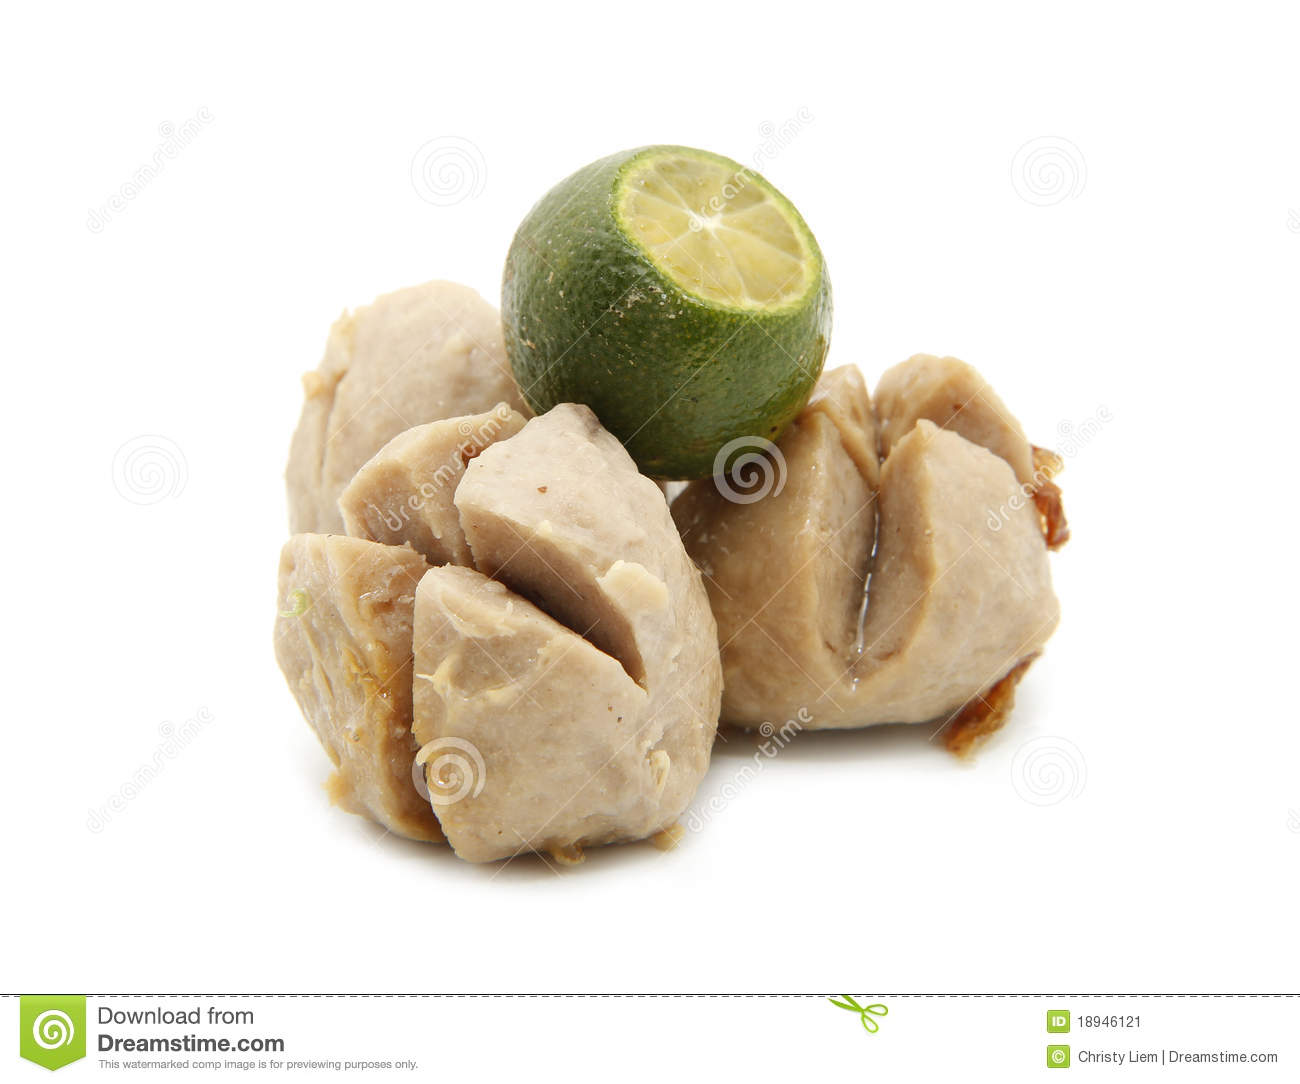 Meat Ball Stock Image   Image  18946121